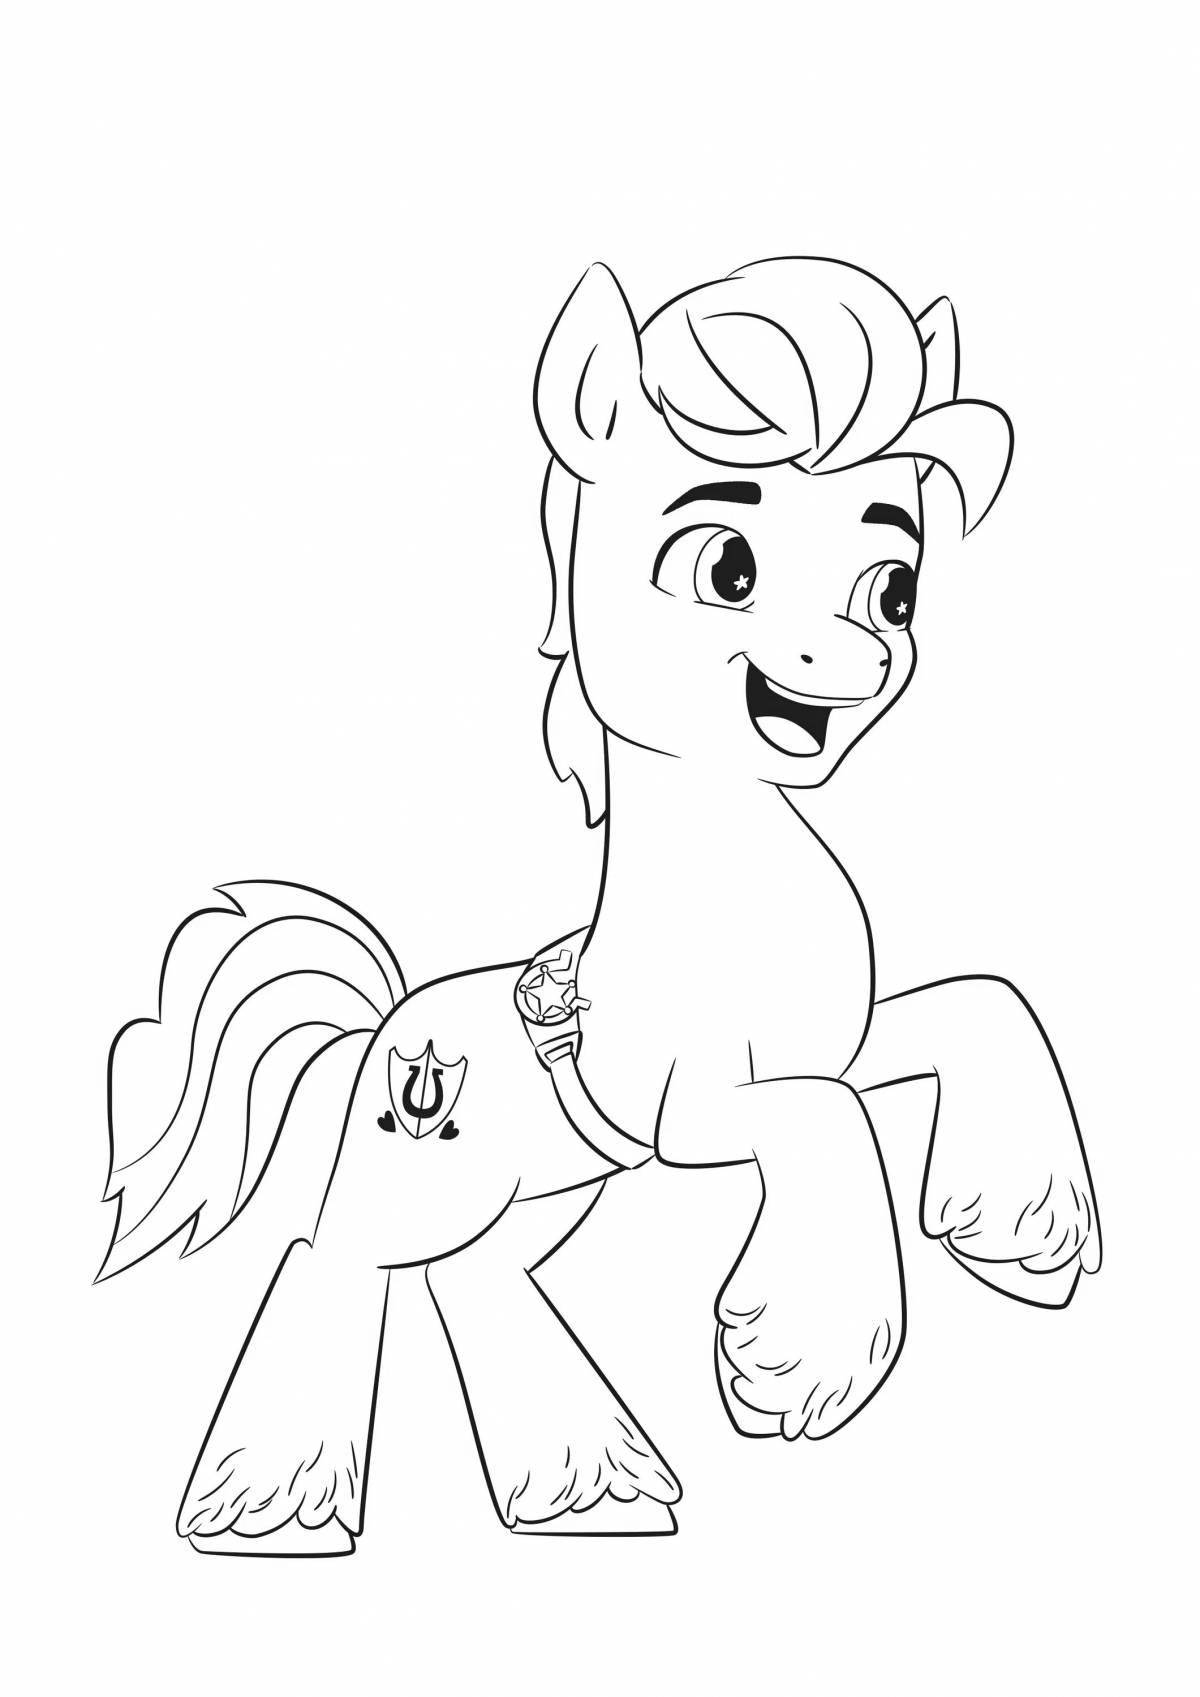 Cute easy pony coloring